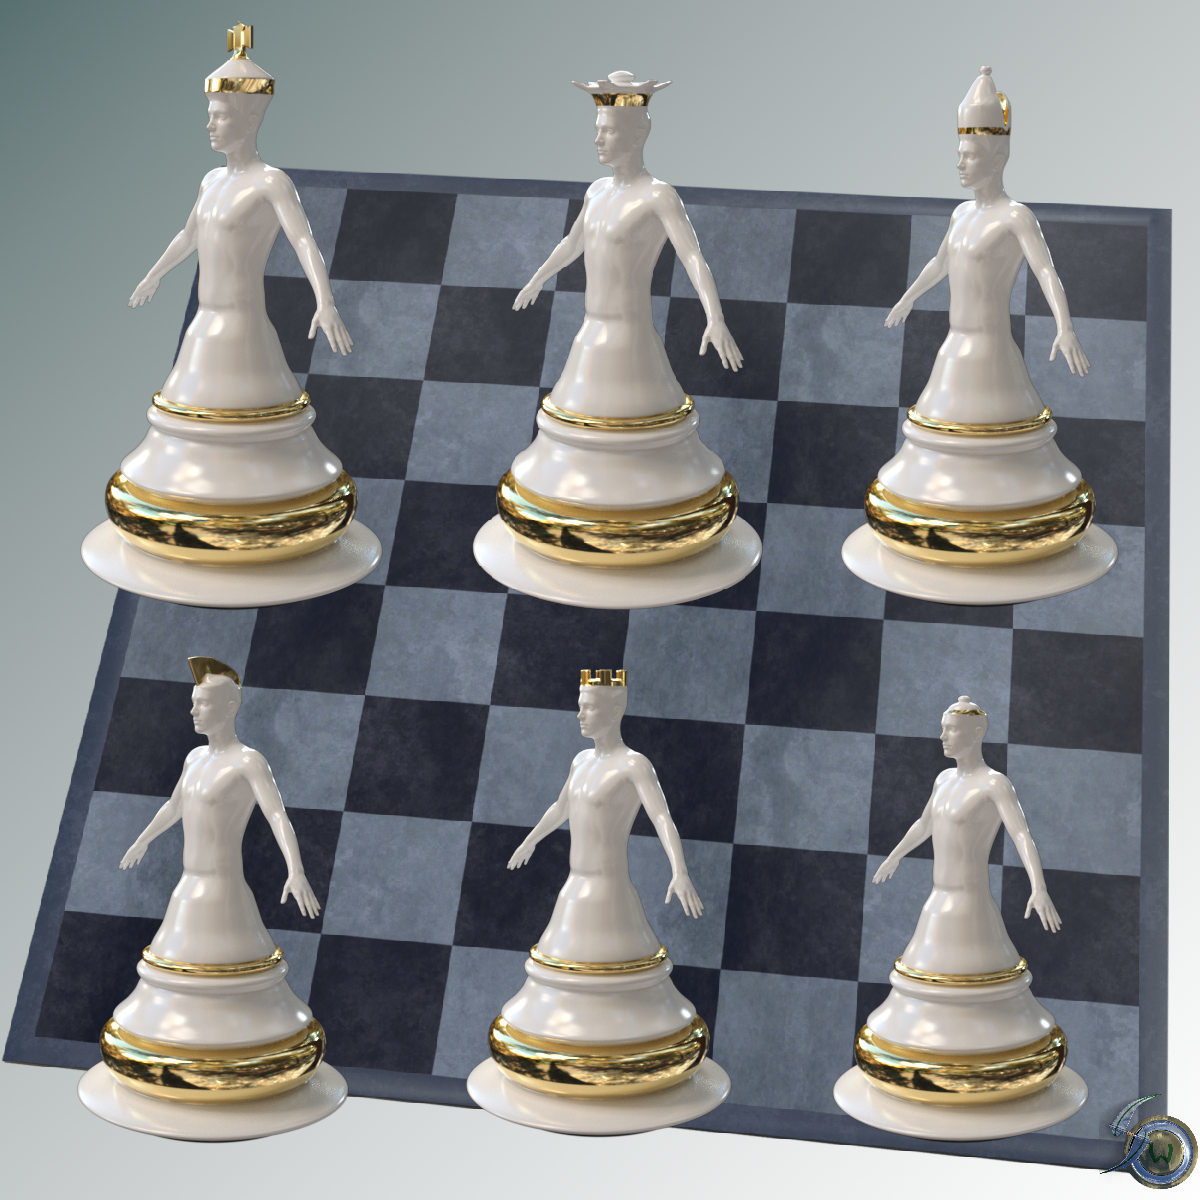 Chess for Genesis 8 by: Silent Winter, 3D Models by Daz 3D